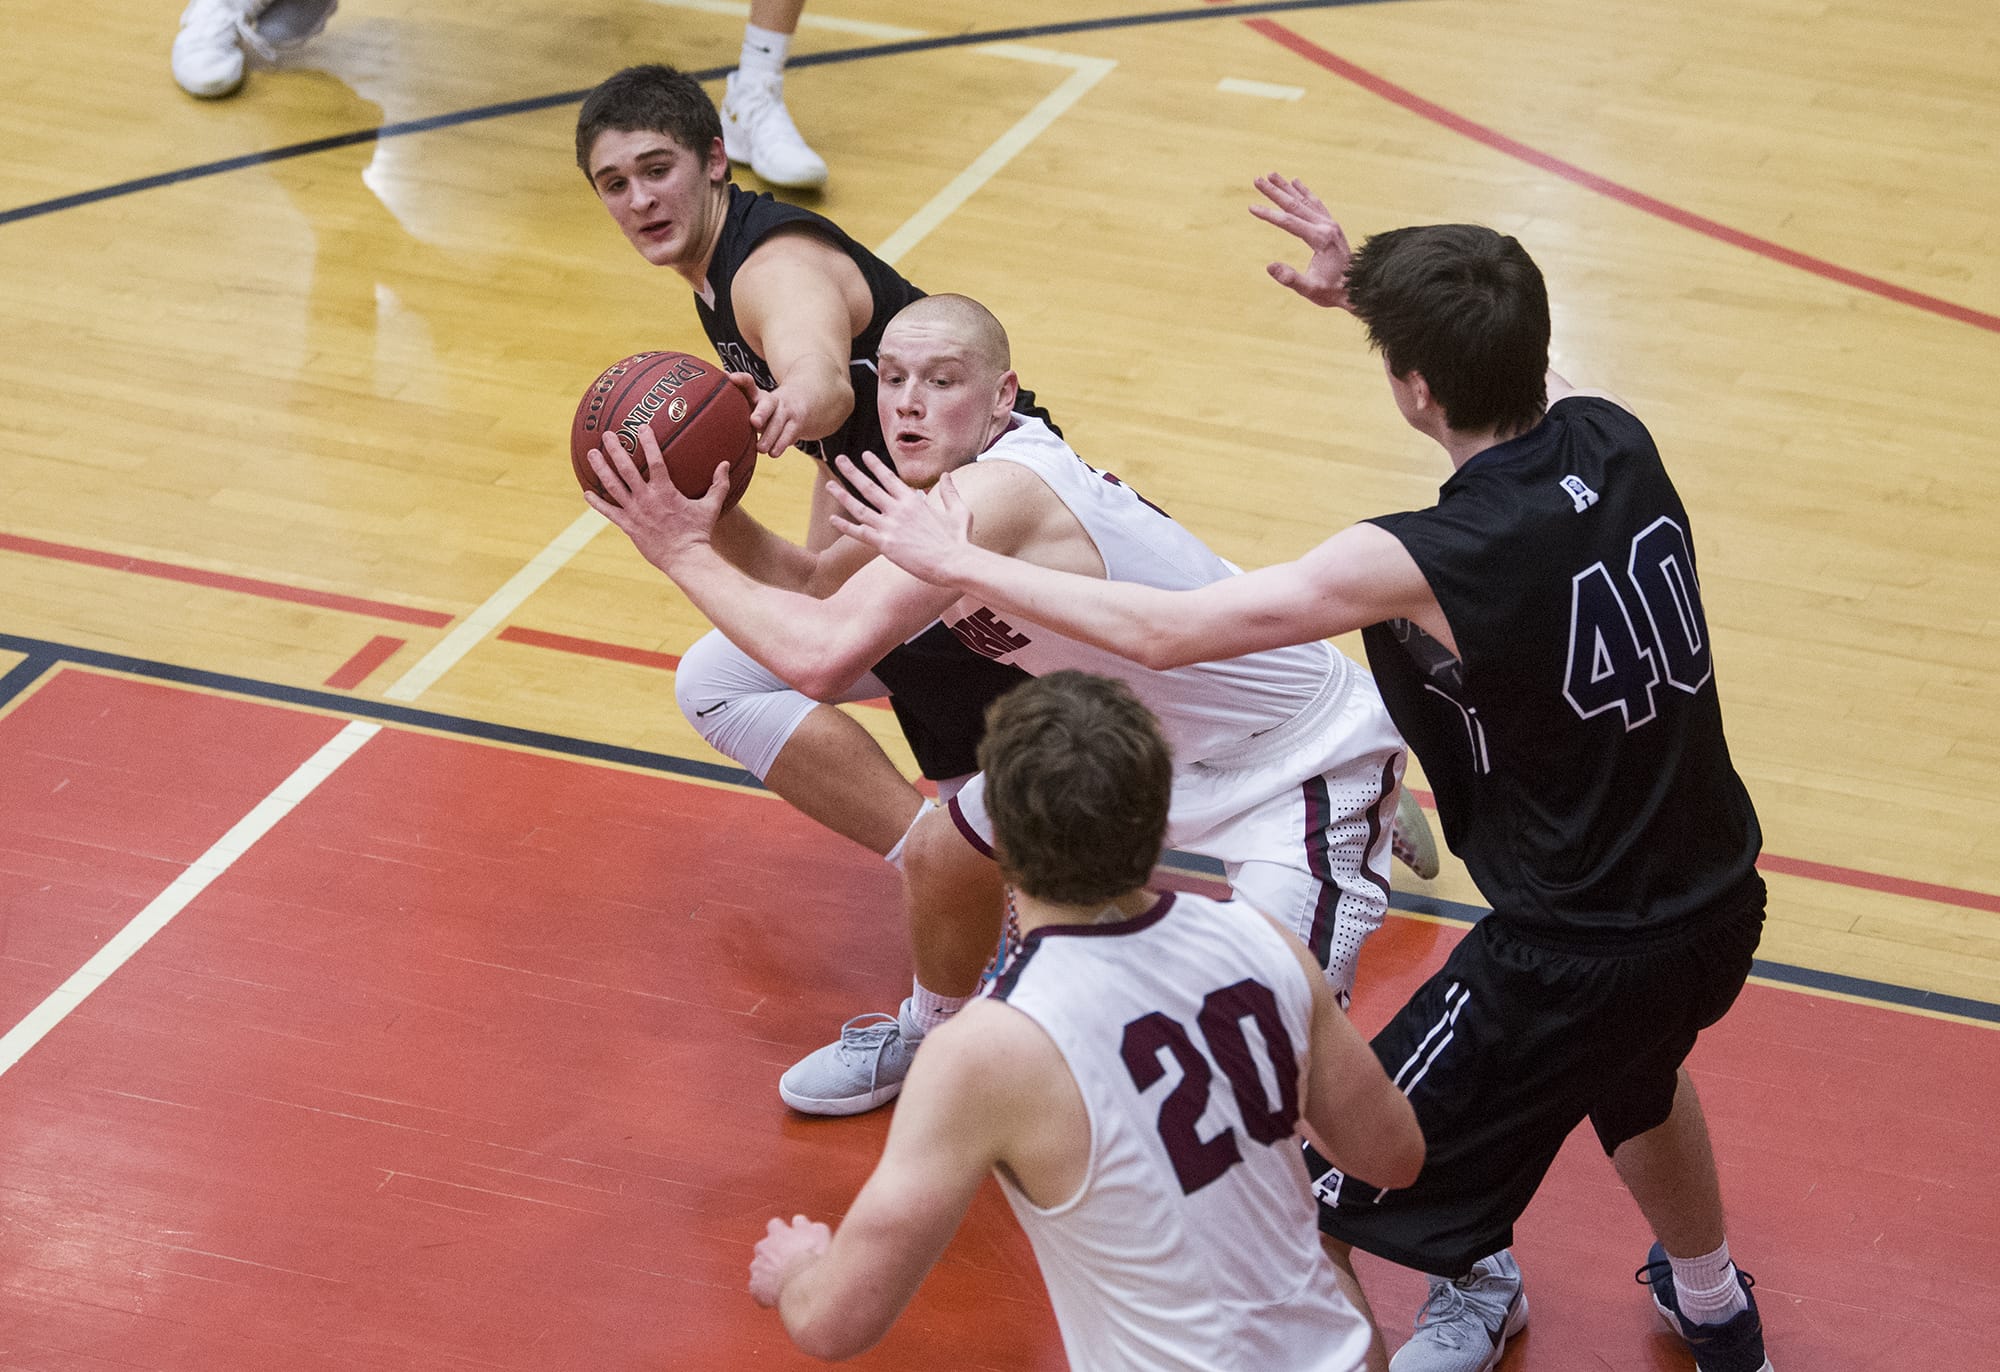 Prairie’s Kameron Osborn (3) prepares to make a pass to Prairie’s Logan Reed (20) while guarding from Arlington’s Max Smith (40) and Griffin Gardoski (3) during the 3A regional boys basketball game at Battle Ground High School, Saturday February 24, 2018.